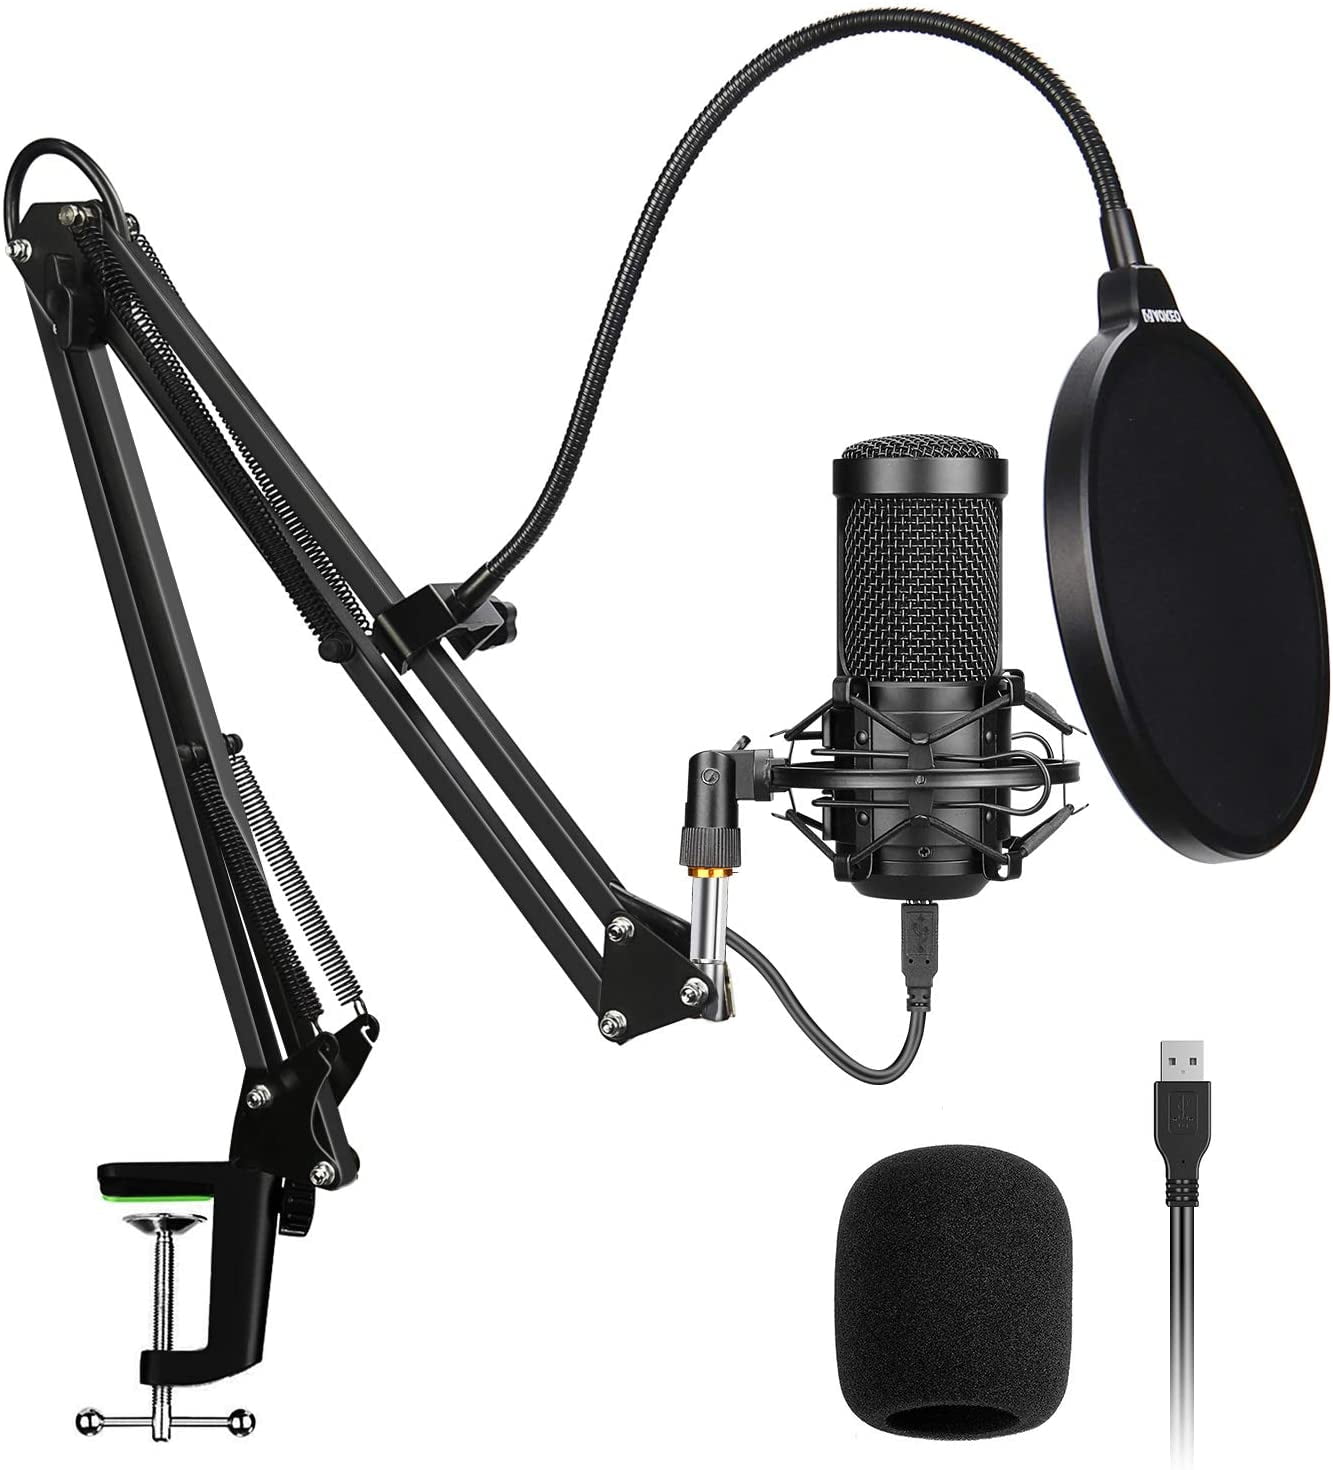 Recording and Gaming Compatible with PC/Lap Podcast Equipment Bundle with 2 Condenser Microphone 2 Foldable Microphone Arm Audio Interface All-in-ONE with 3.5mm Microphone Perfect for Live Streaming 